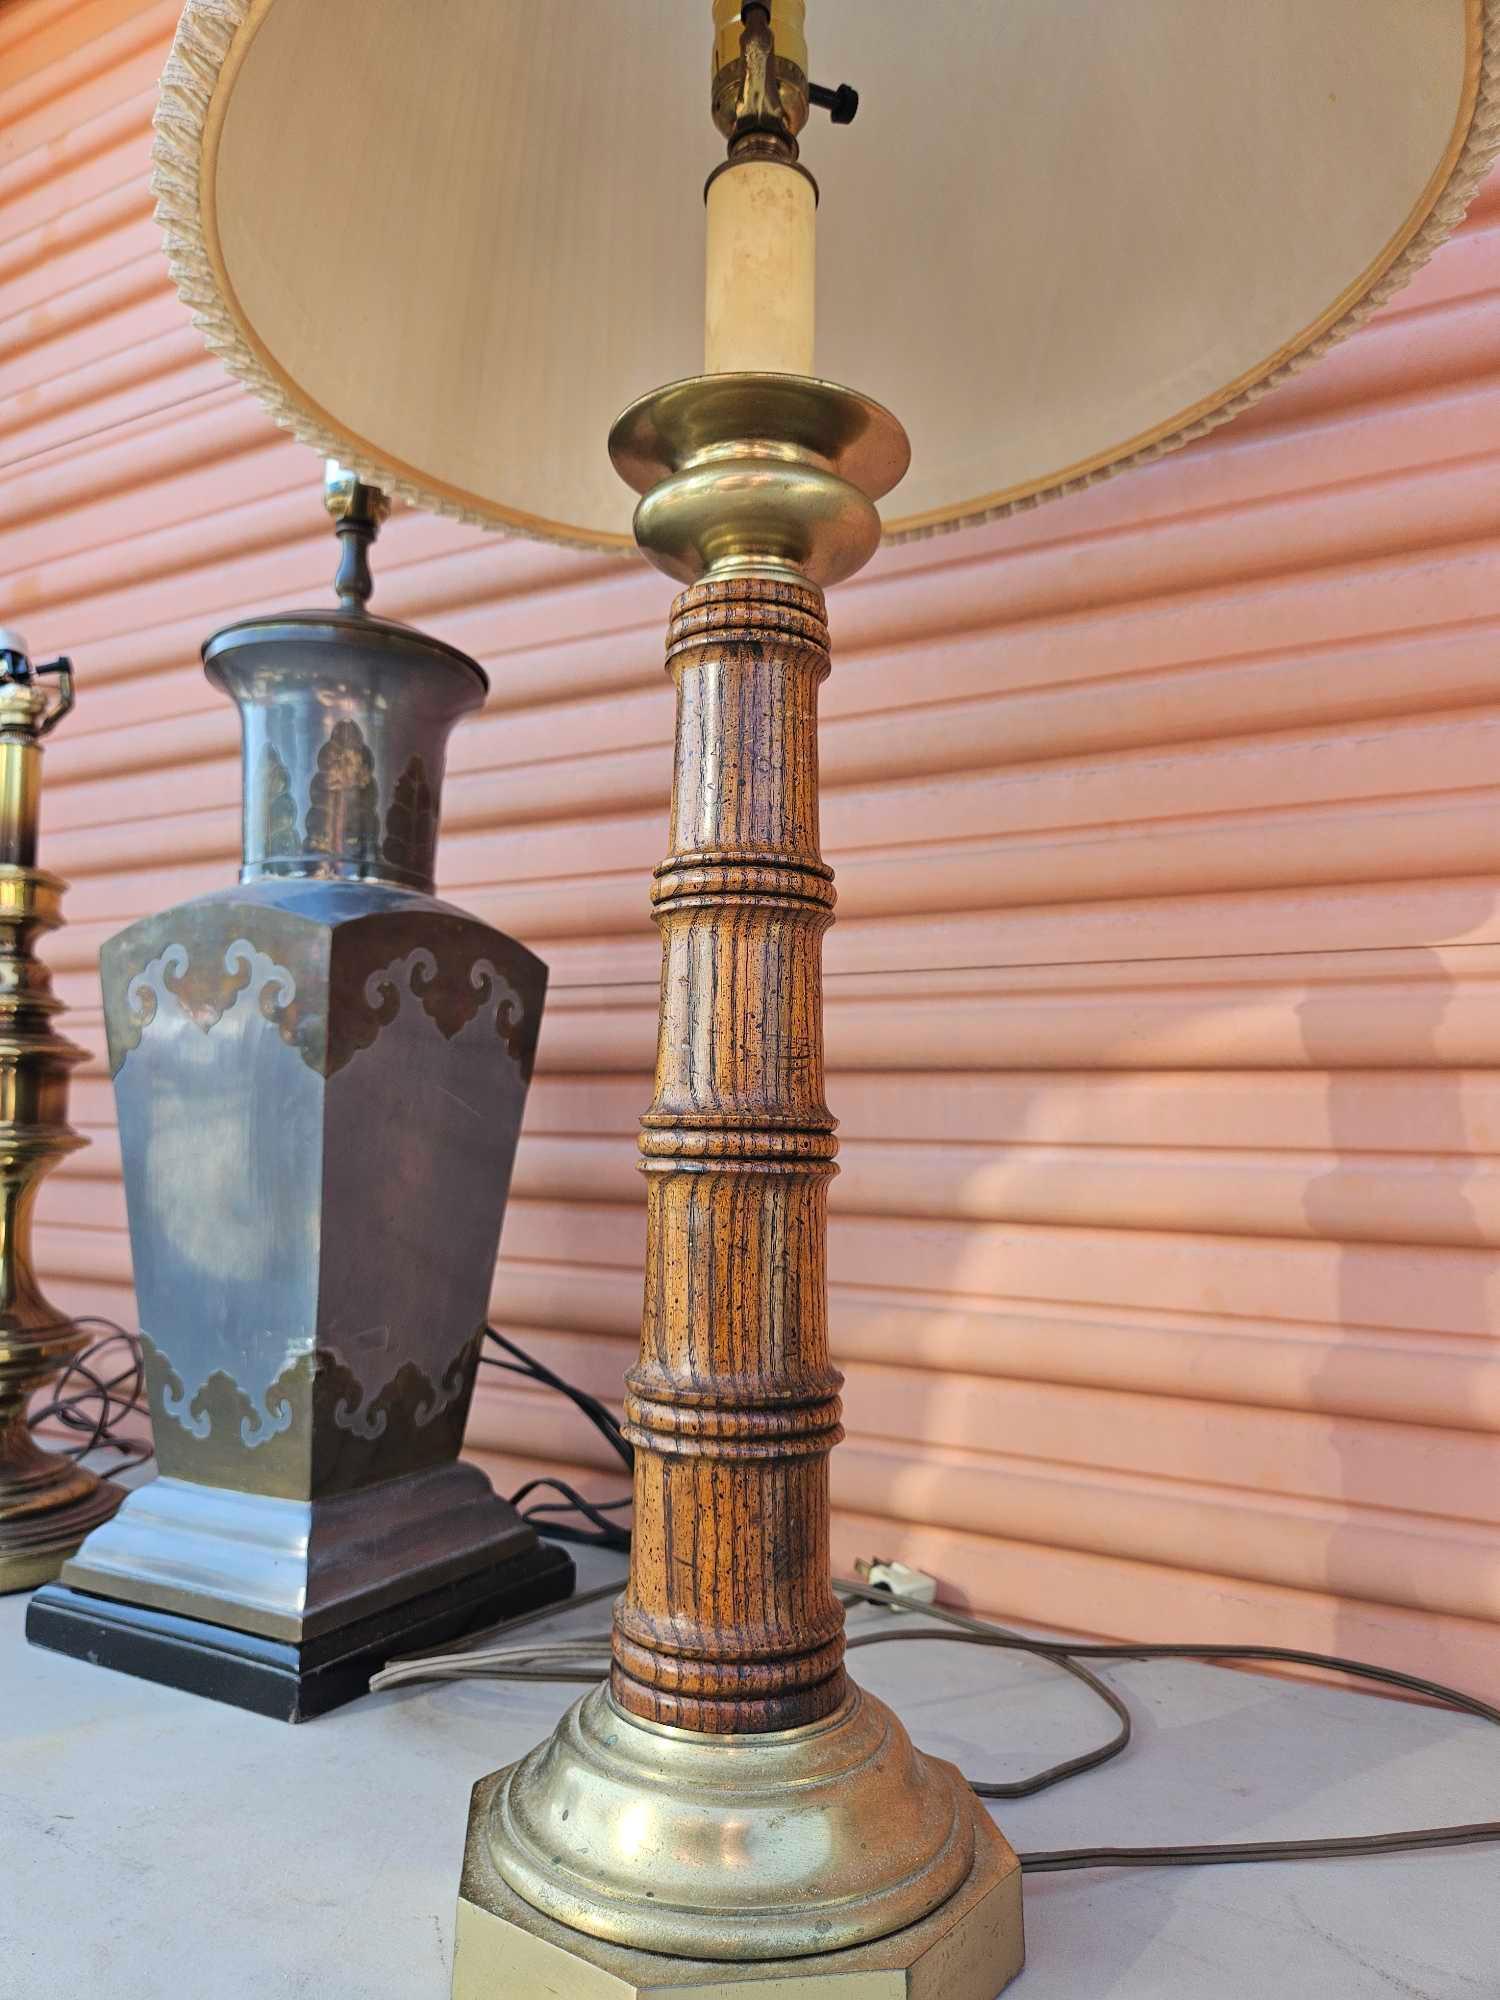 Heavy brass, Wood and Brass, and Heavy Metal LAMP grouping